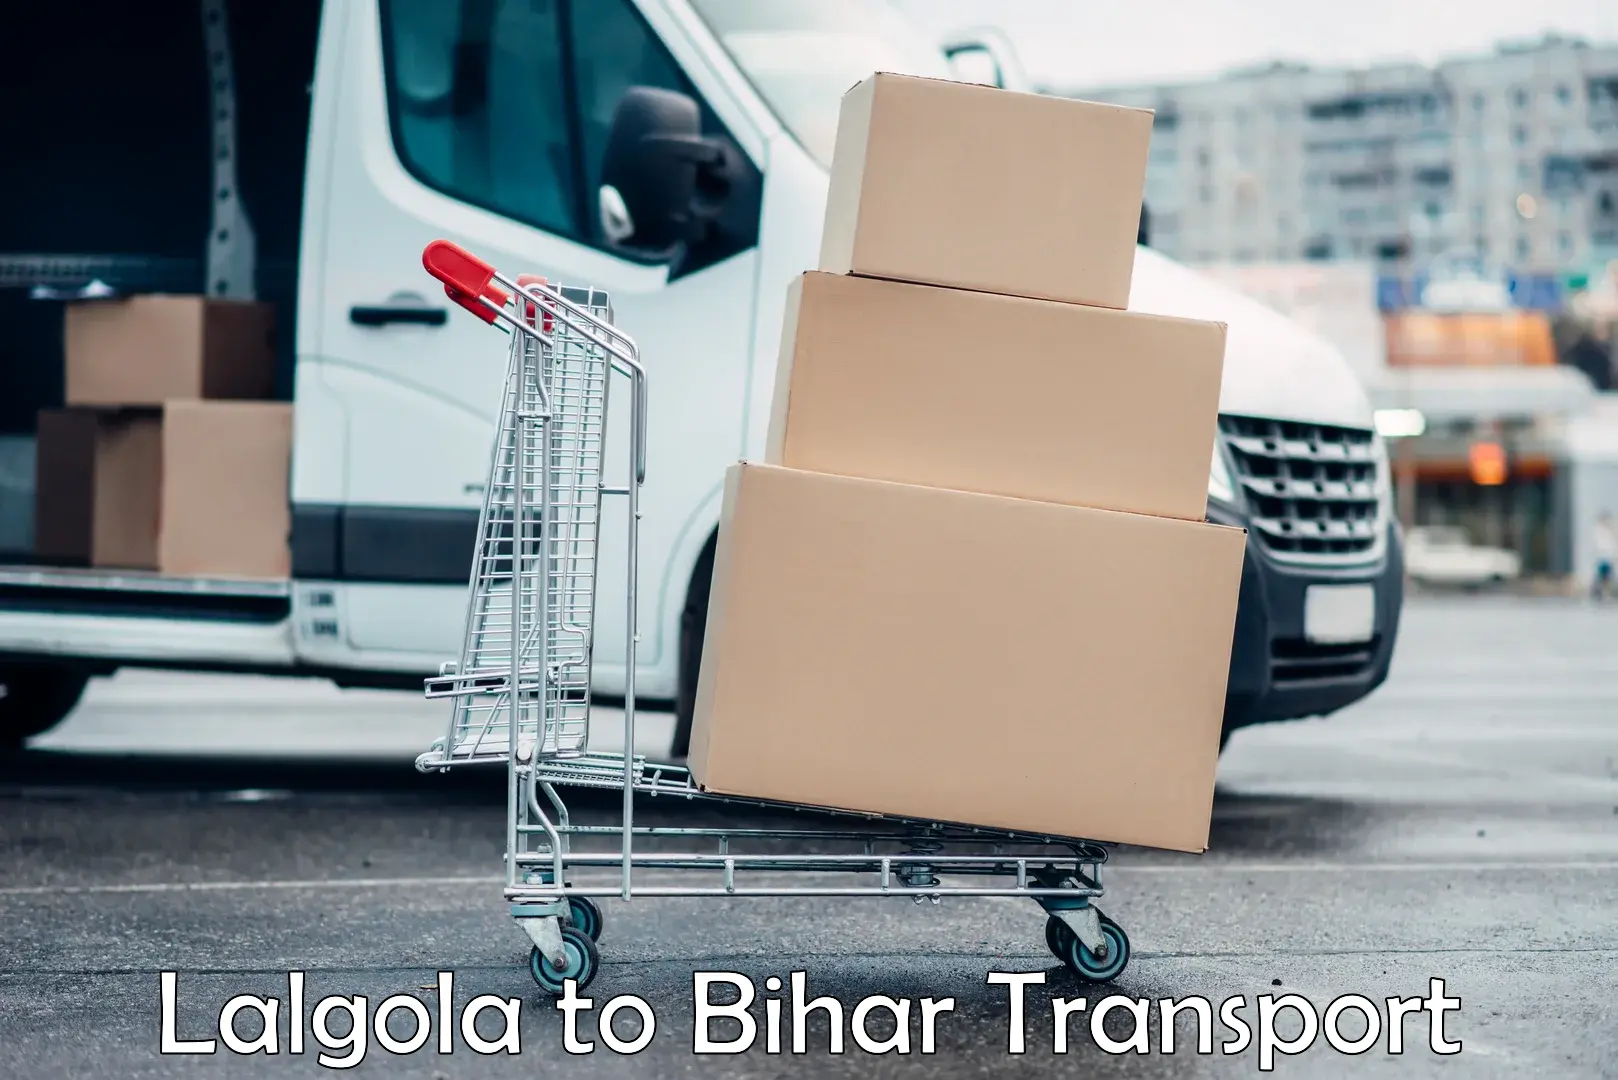 Nationwide transport services Lalgola to Dhaka